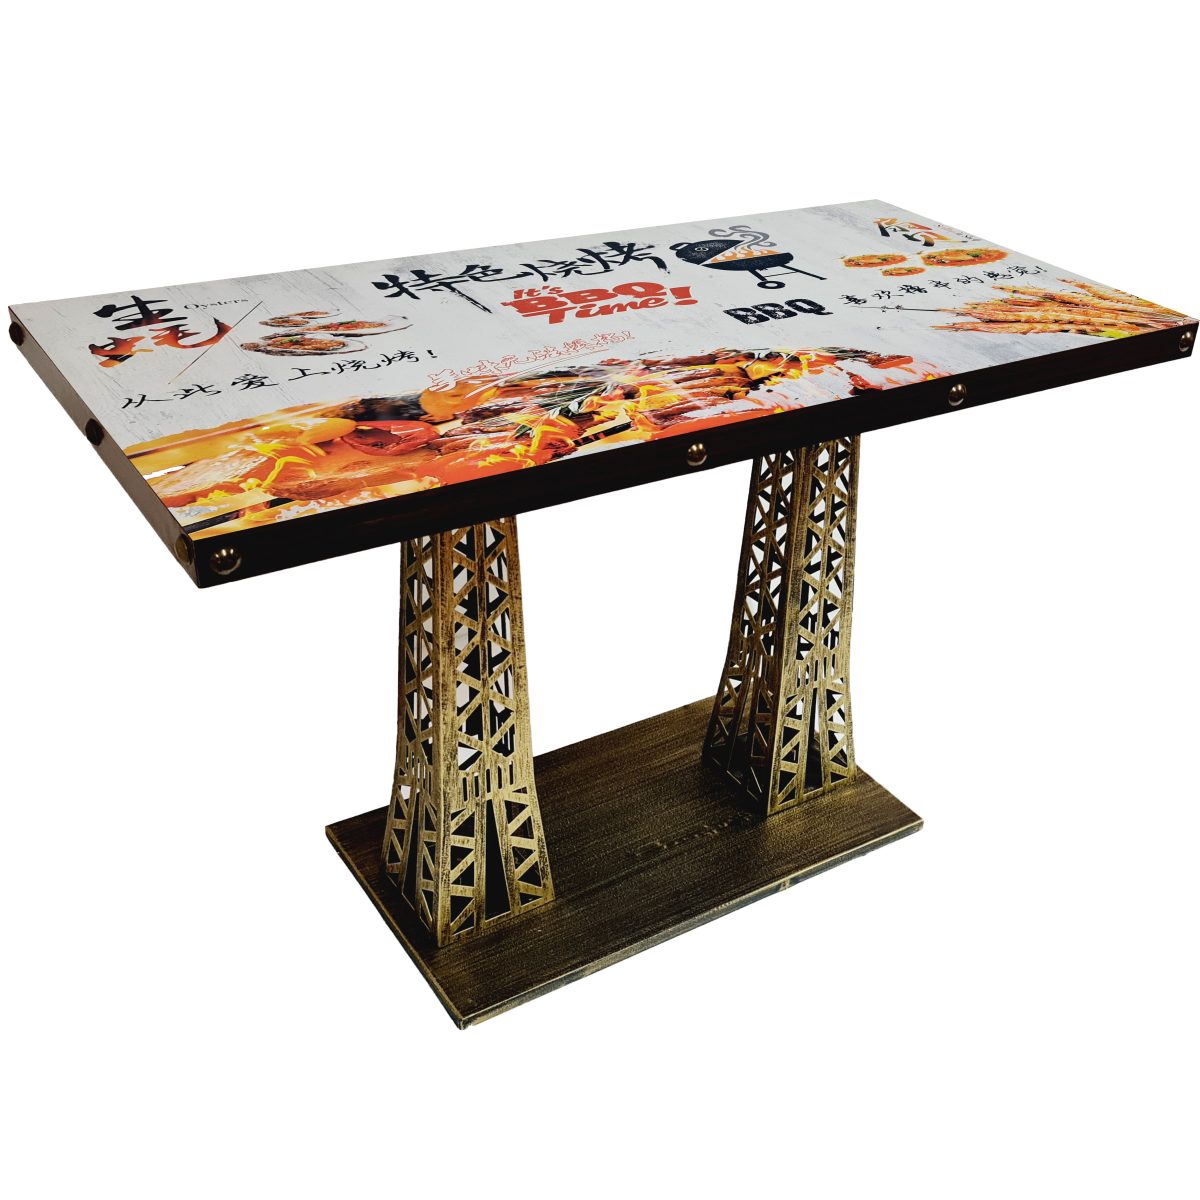 Grill Shop Table